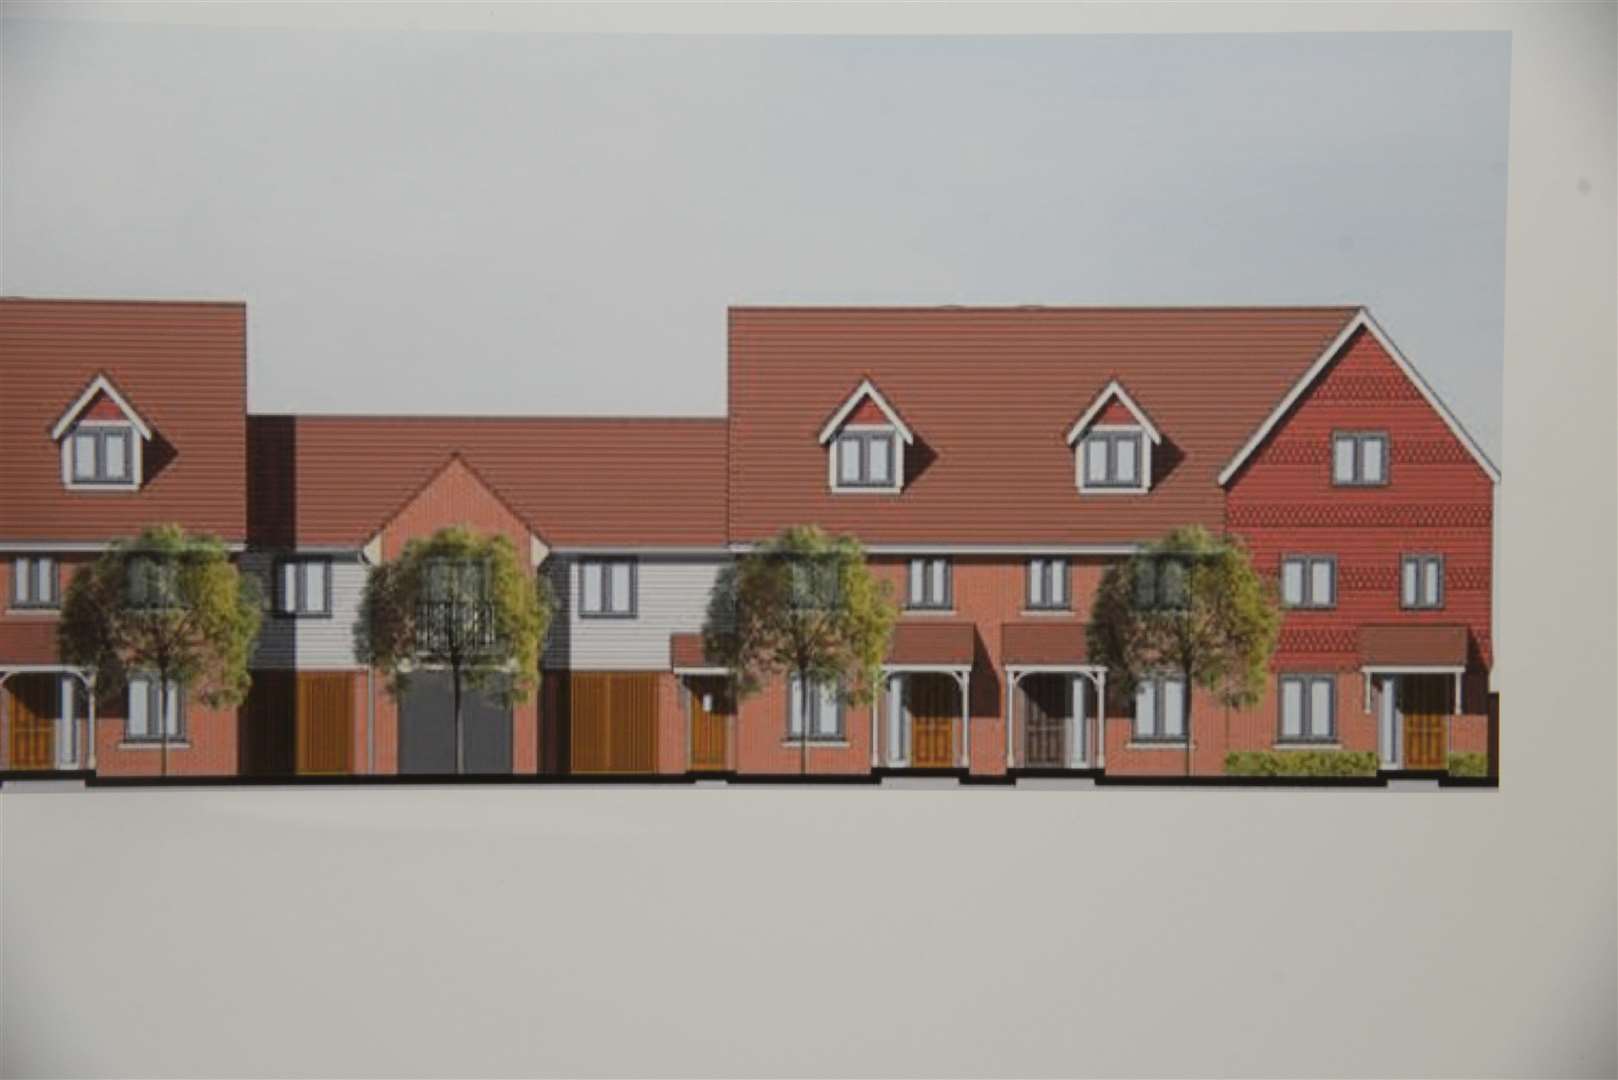 New homes depicted at the Pump Lane development consultation in Holy Trinity Church Hall, Twydall on Friday. Picture: Chris Davey. (13735192)